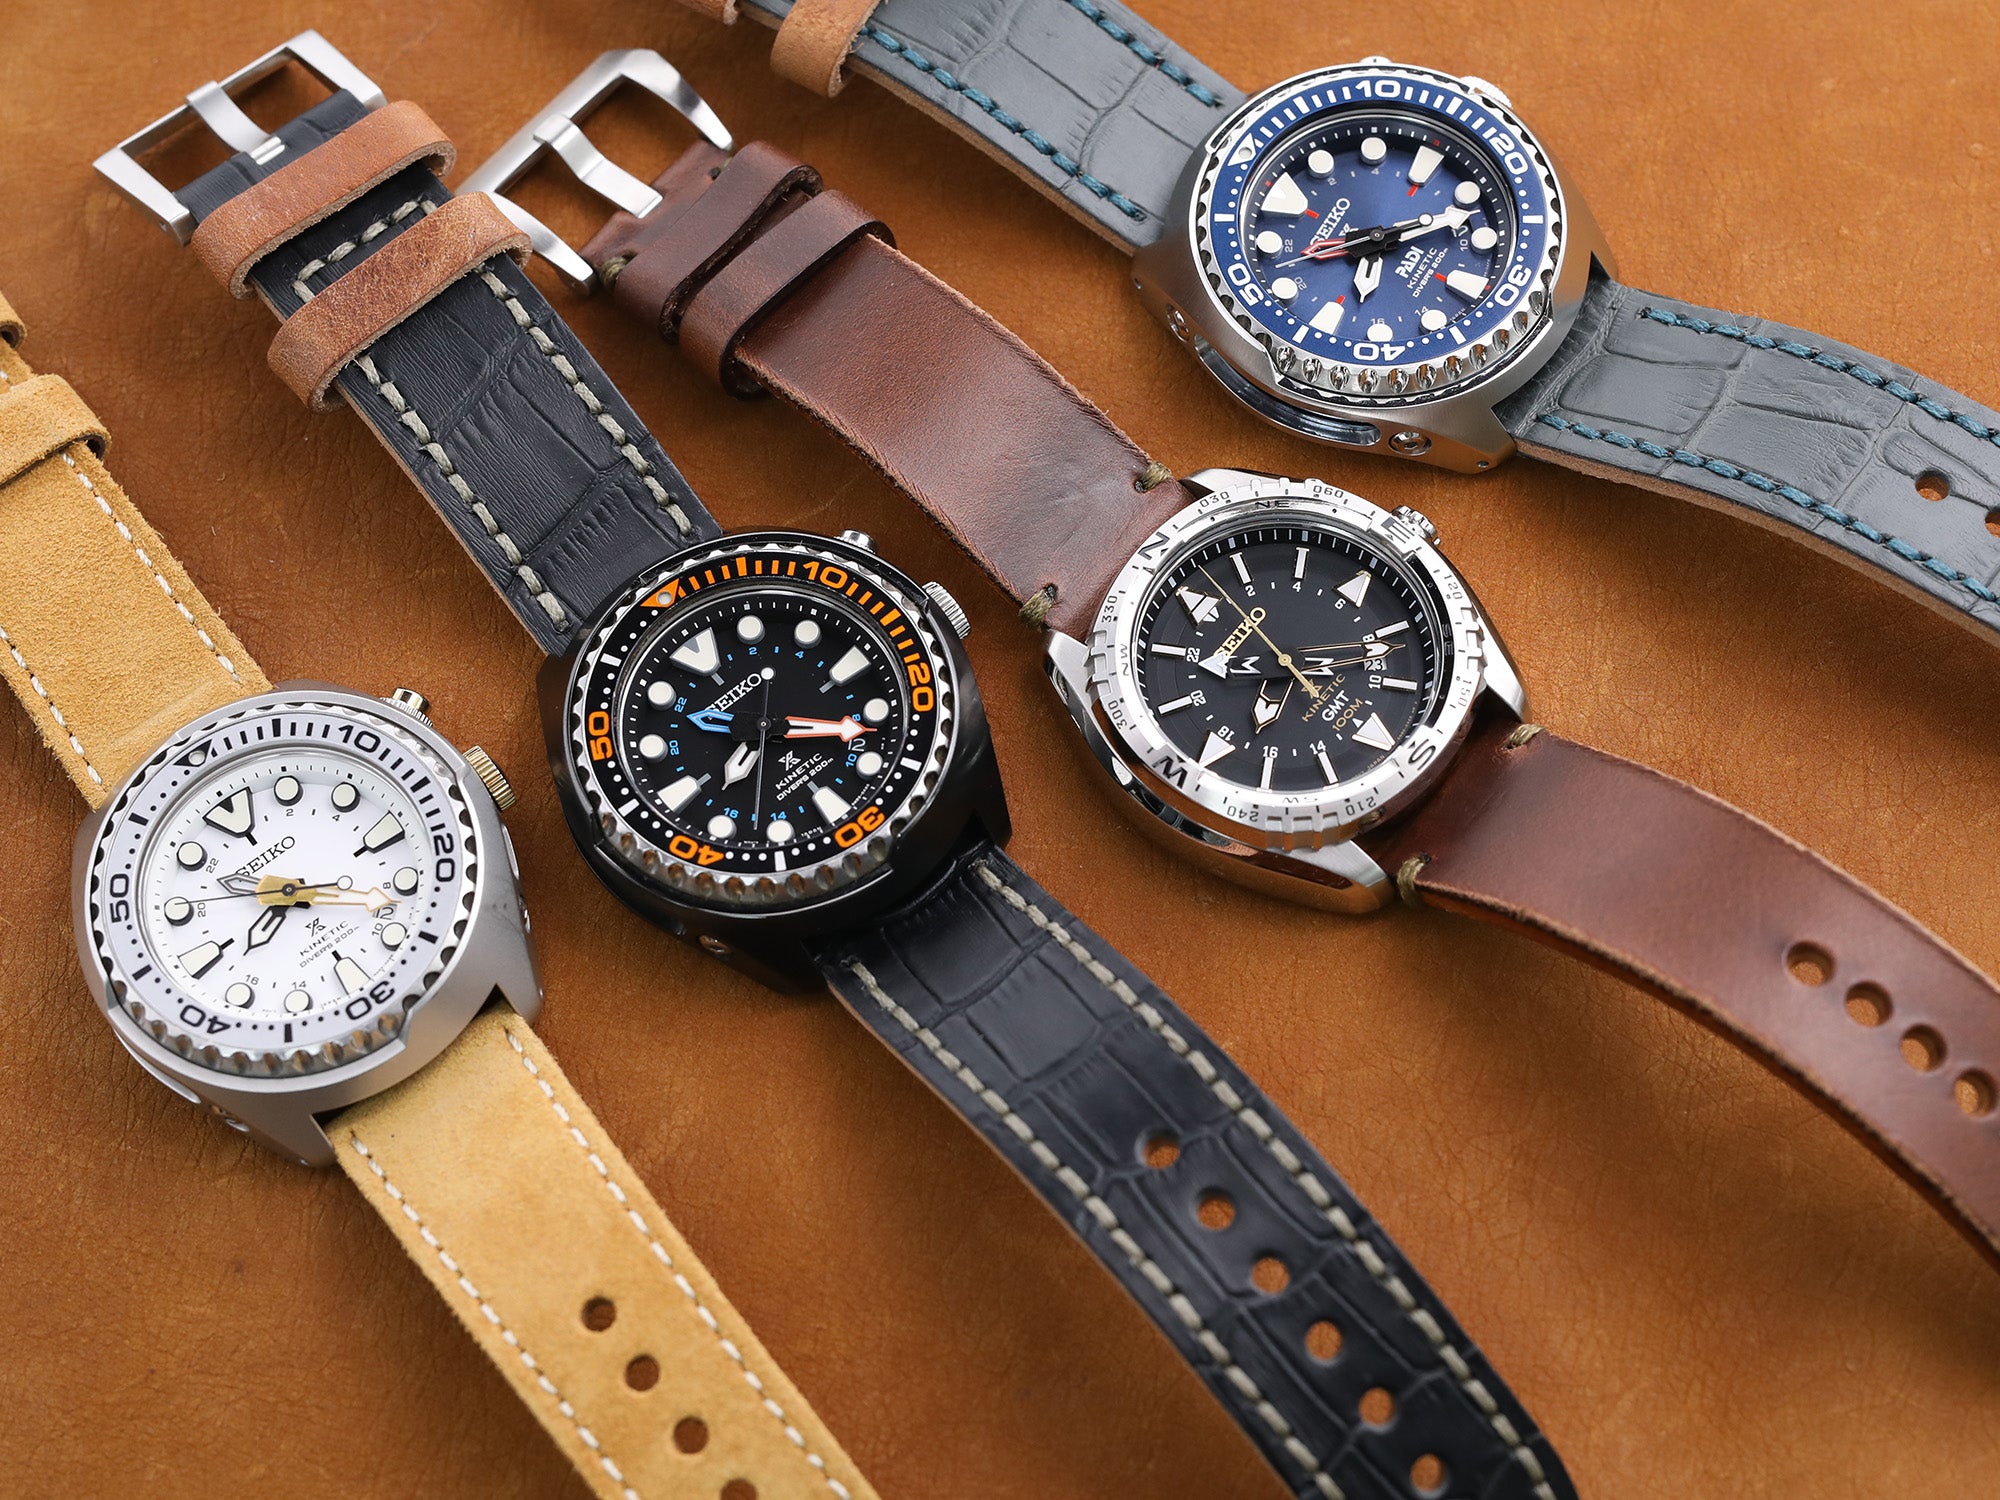 About Seiko Kinetic watches and Kinetic Movements | WatchinTyme